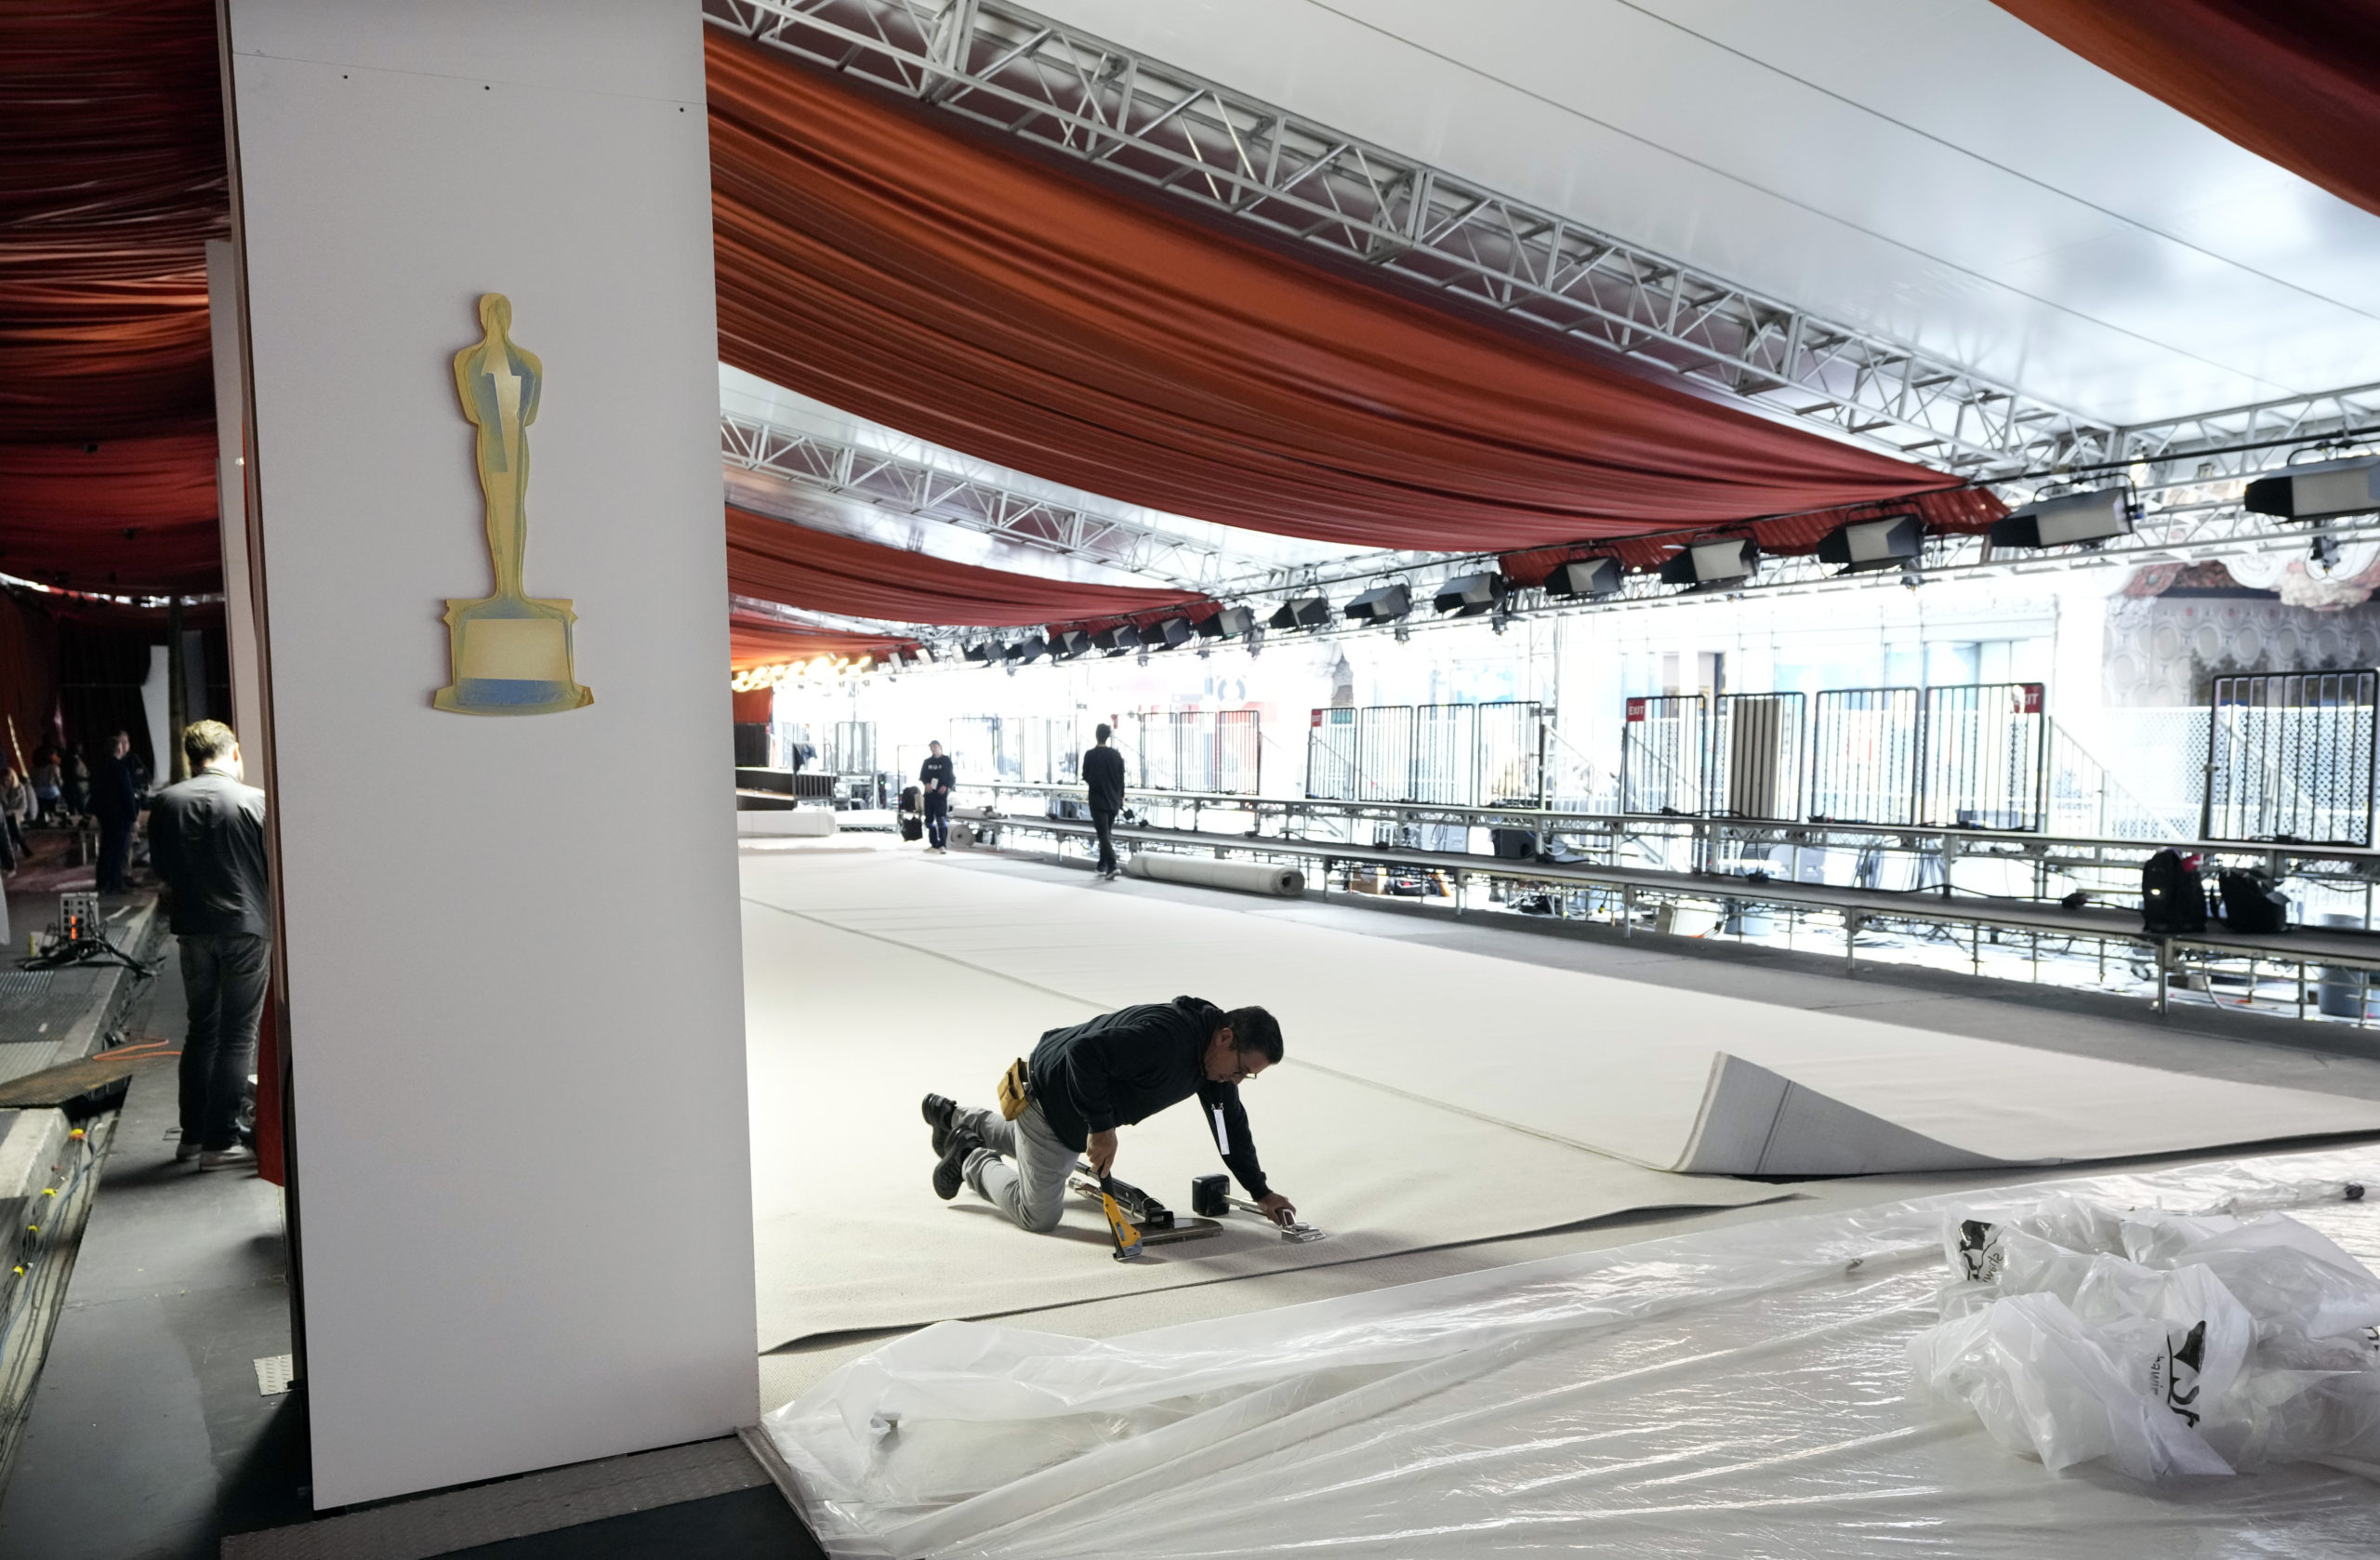 A crew member staples the carpet to the ground in preparation for Sunday's 95th Academy Awards in Los Angeles on Wednesday.